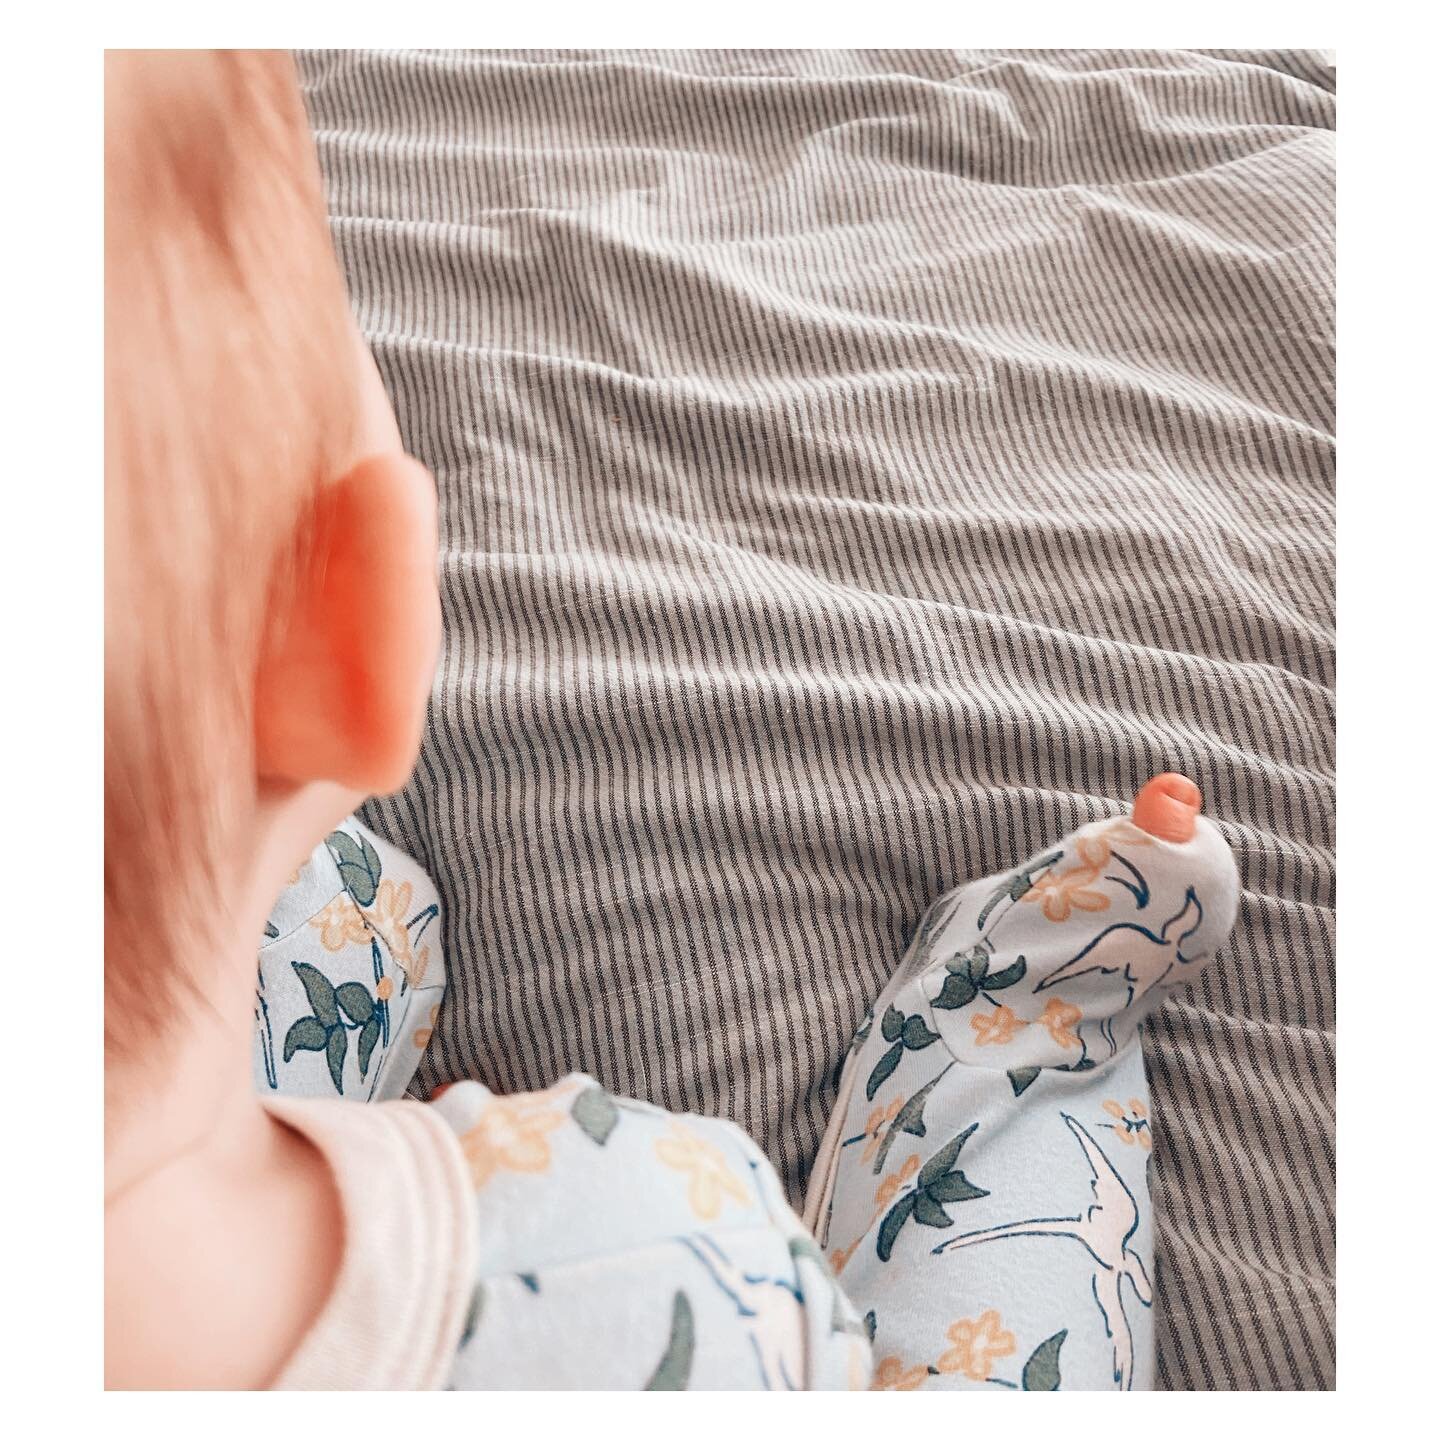 Meditation Haiku #66
To find ourselves - here
In stillness like a baby 
Finding her own toe 

~&gt; When this kiddo was born, @rhettisadlar sent us a congrats with the message that &ldquo;she is the teacher now&rdquo;, and honestly, that&rsquo;s been